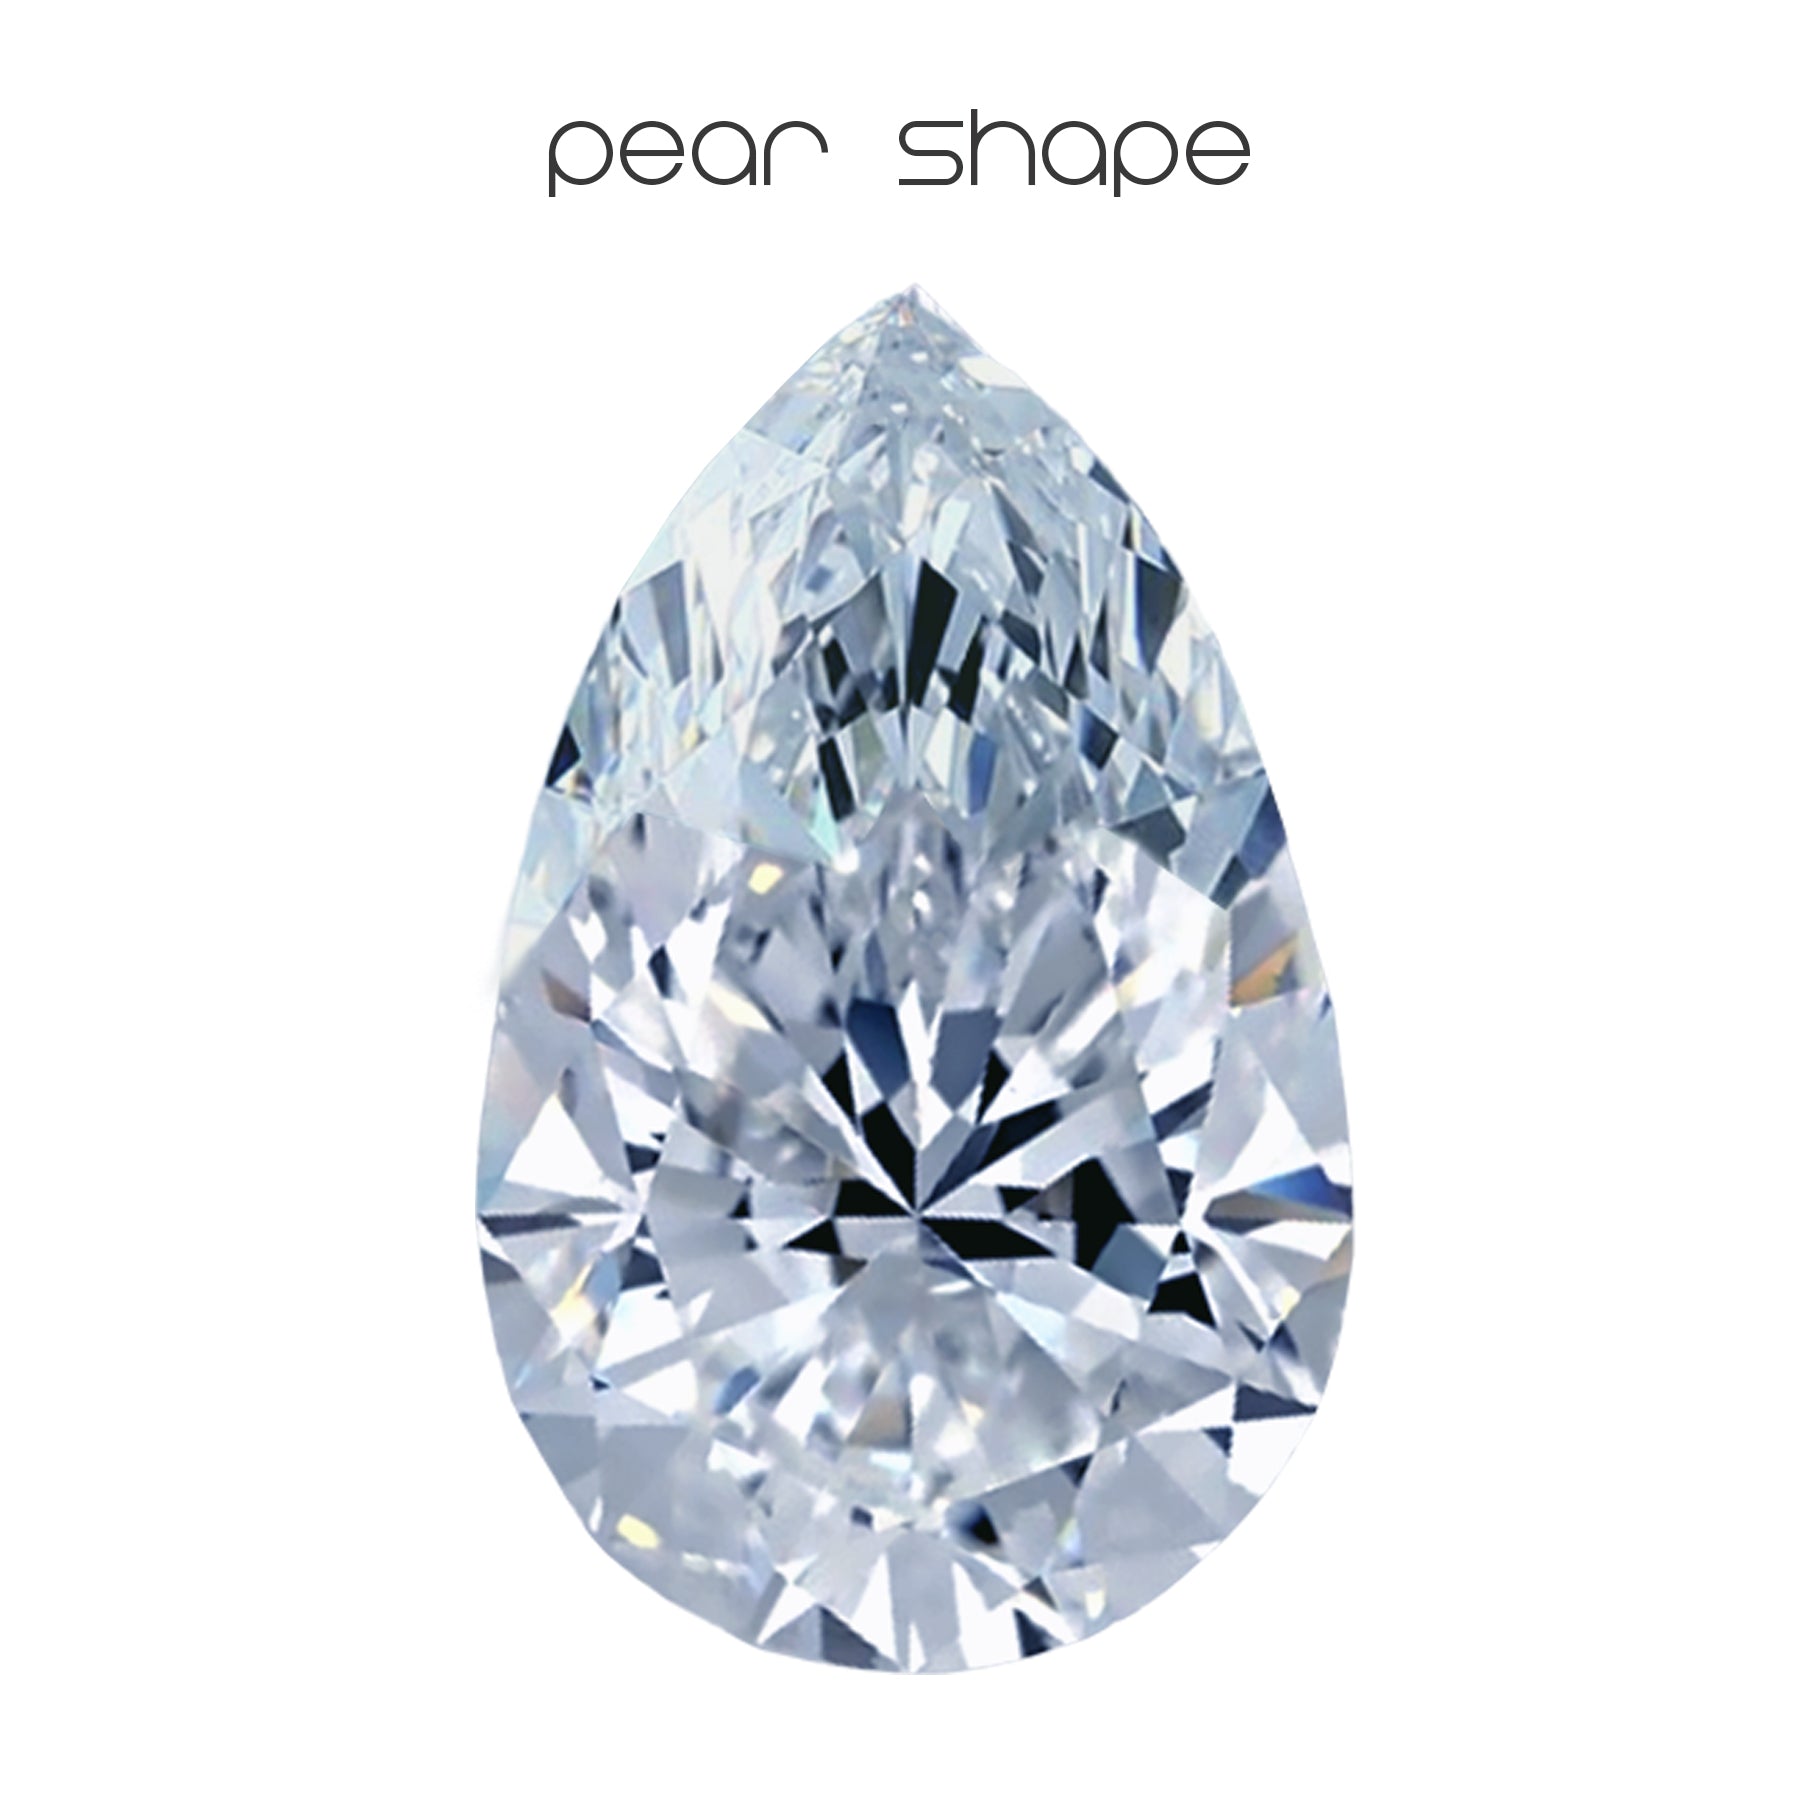 the history and meaning of the pear shape